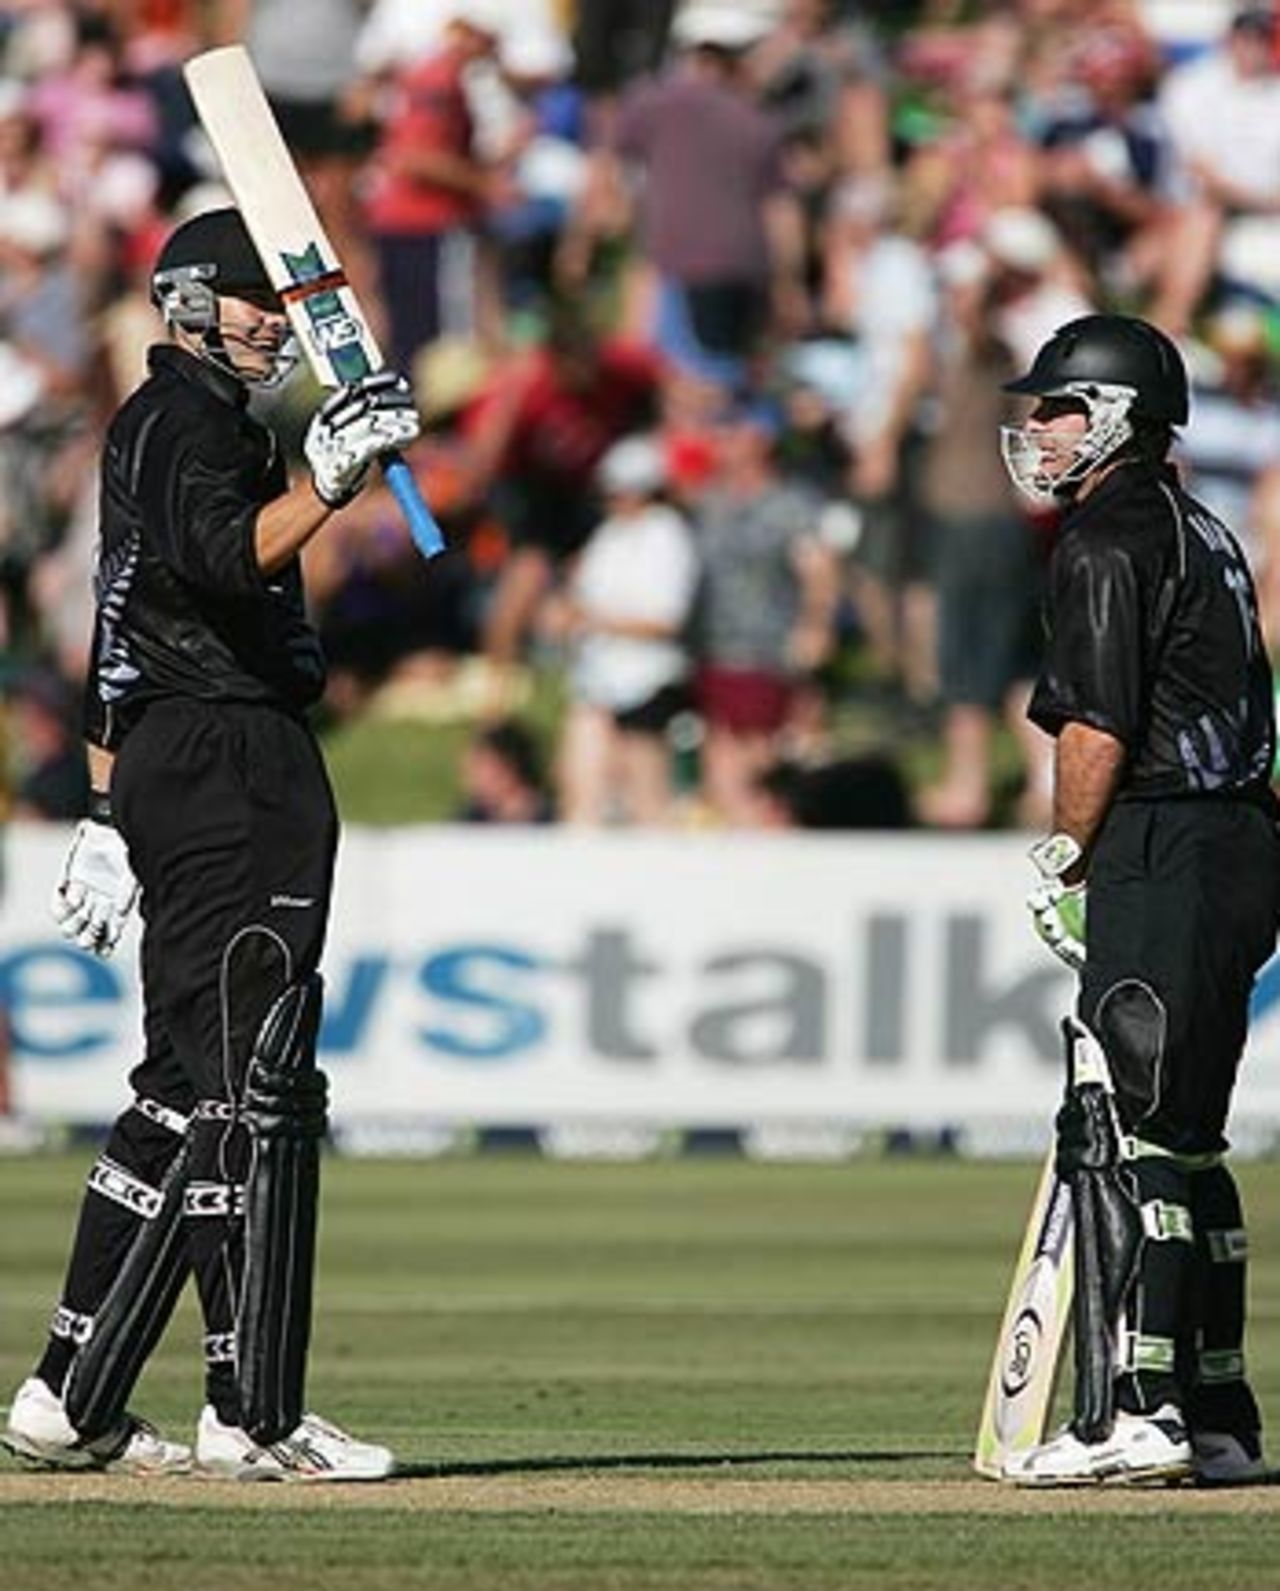 Peter Fulton and Jamie How put on solid performances as New Zealand raced to victory, New Zealand Sri Lanka, 1st ODI, Queenstown, December 31, 2005